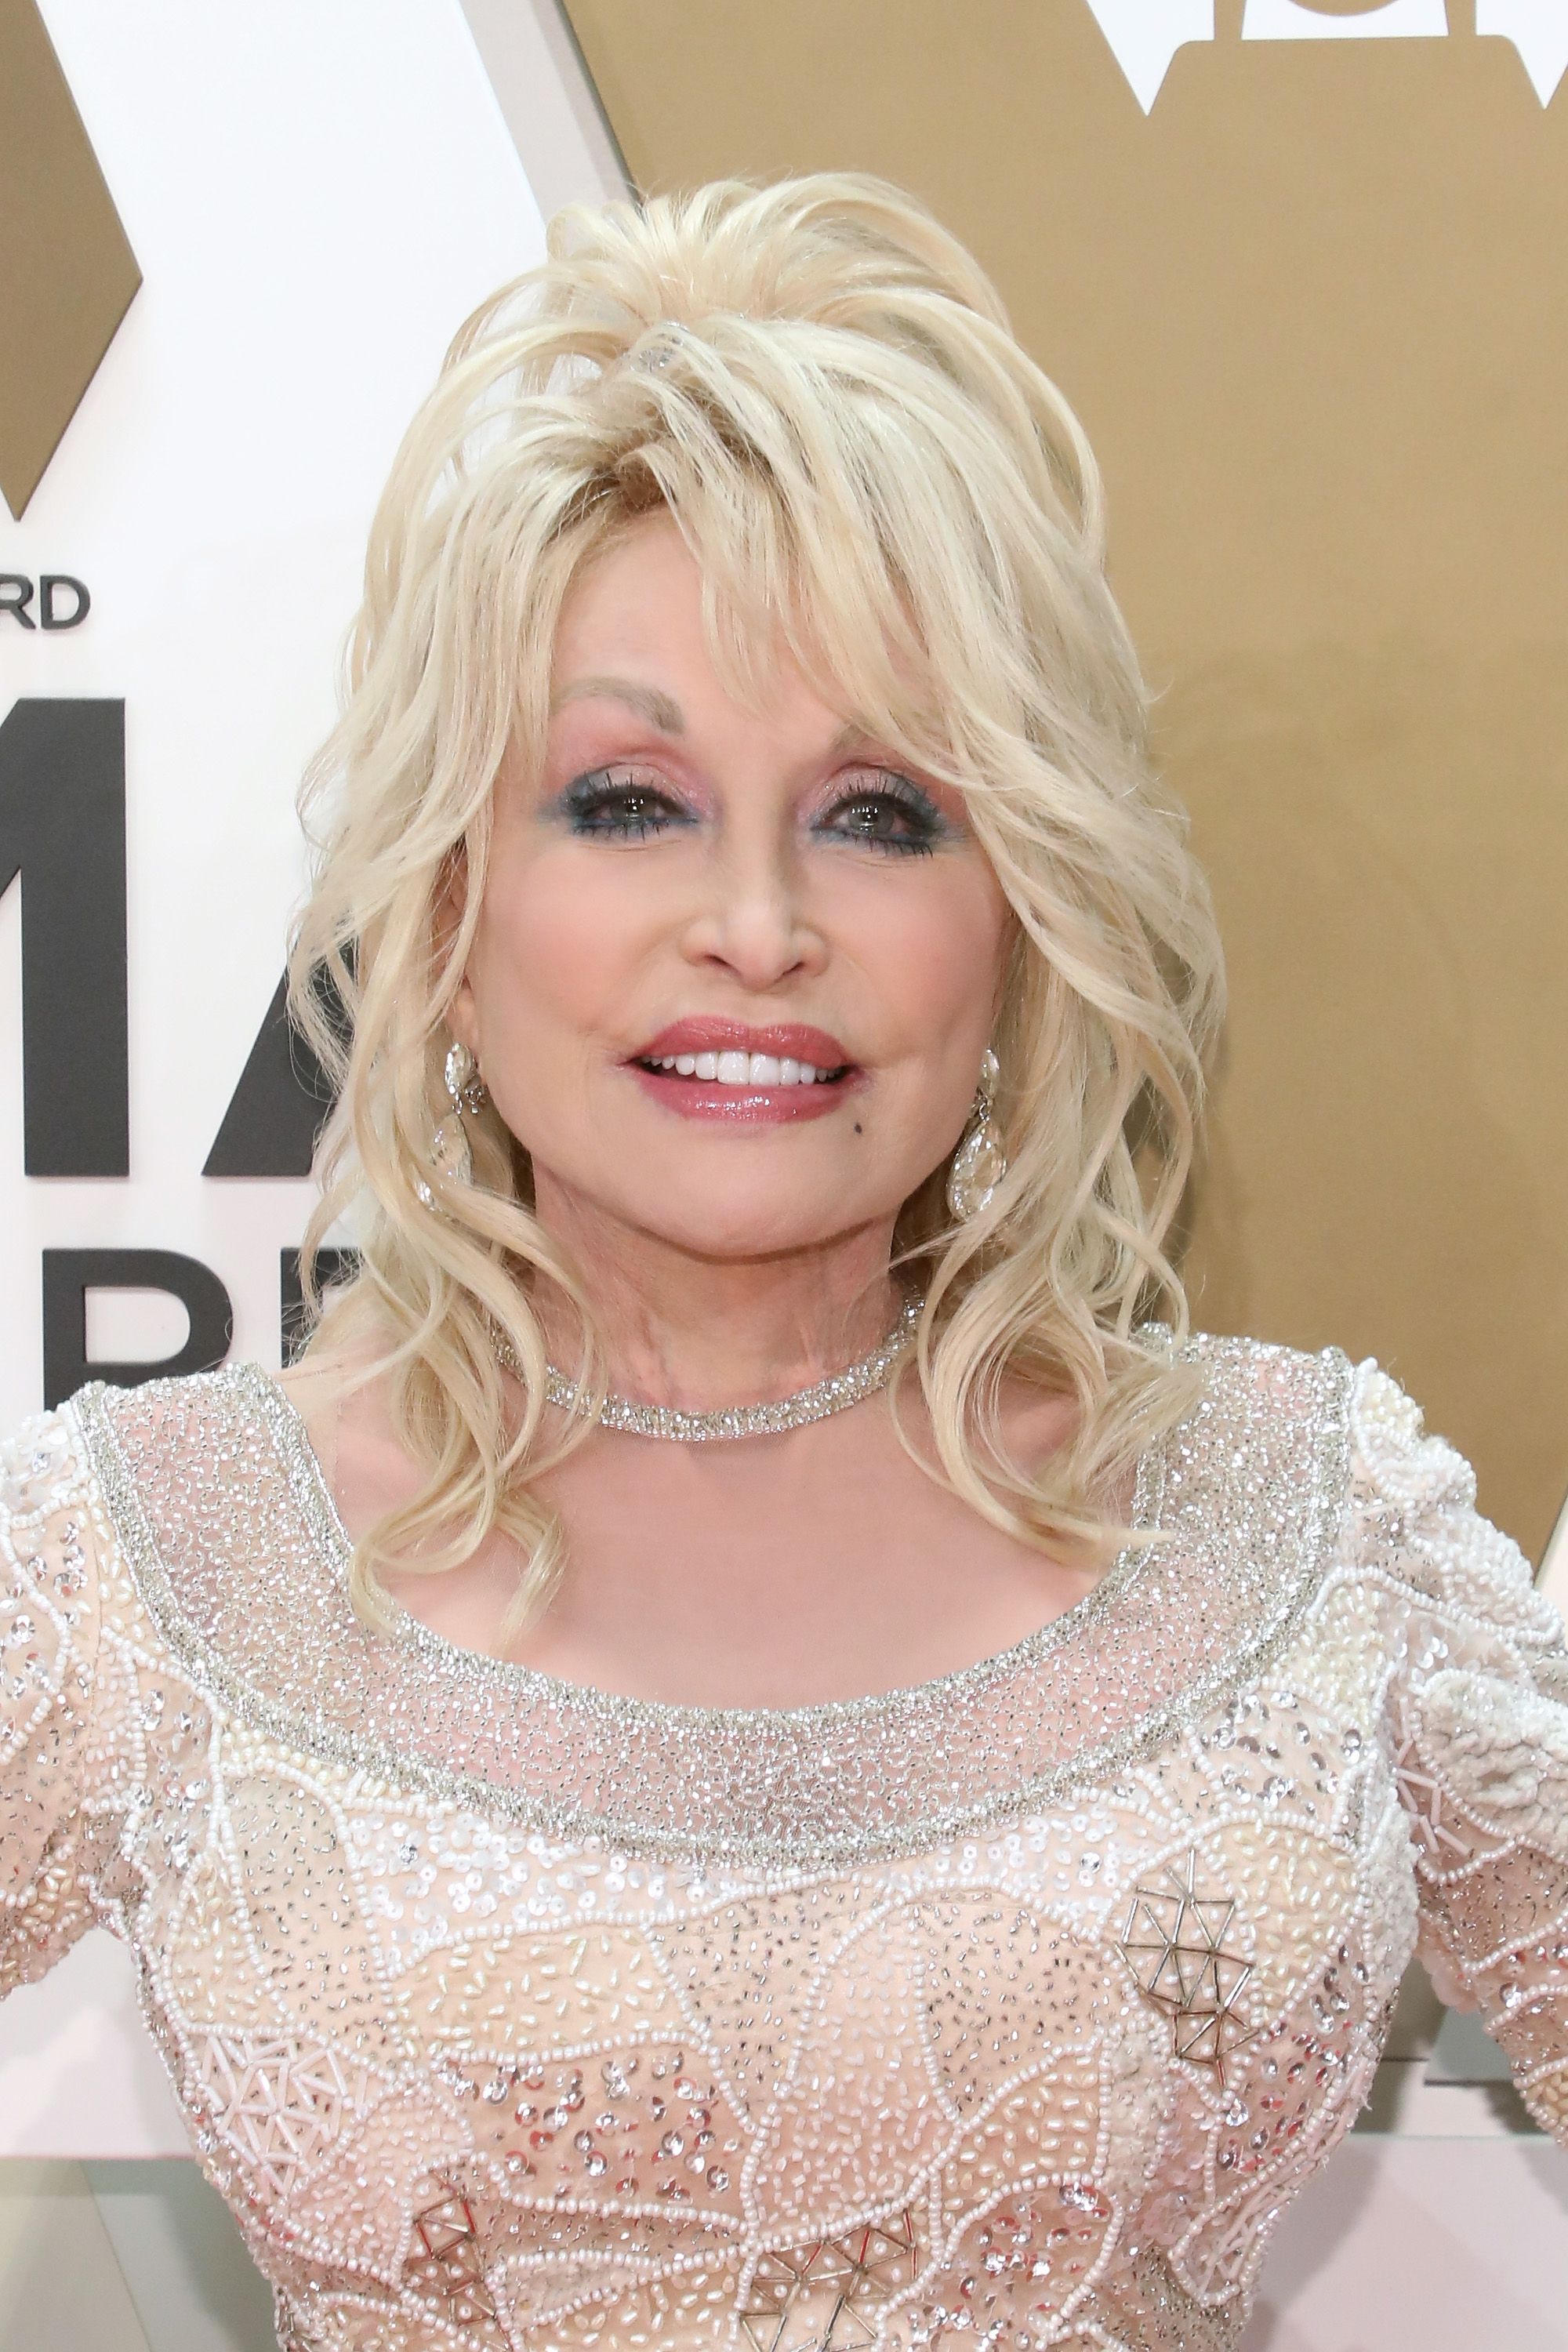 Dolly Parton Talks About Working In Her 70s, Says “I Know That I Probably  Am Old, But I'm Never Gonna Admit That”